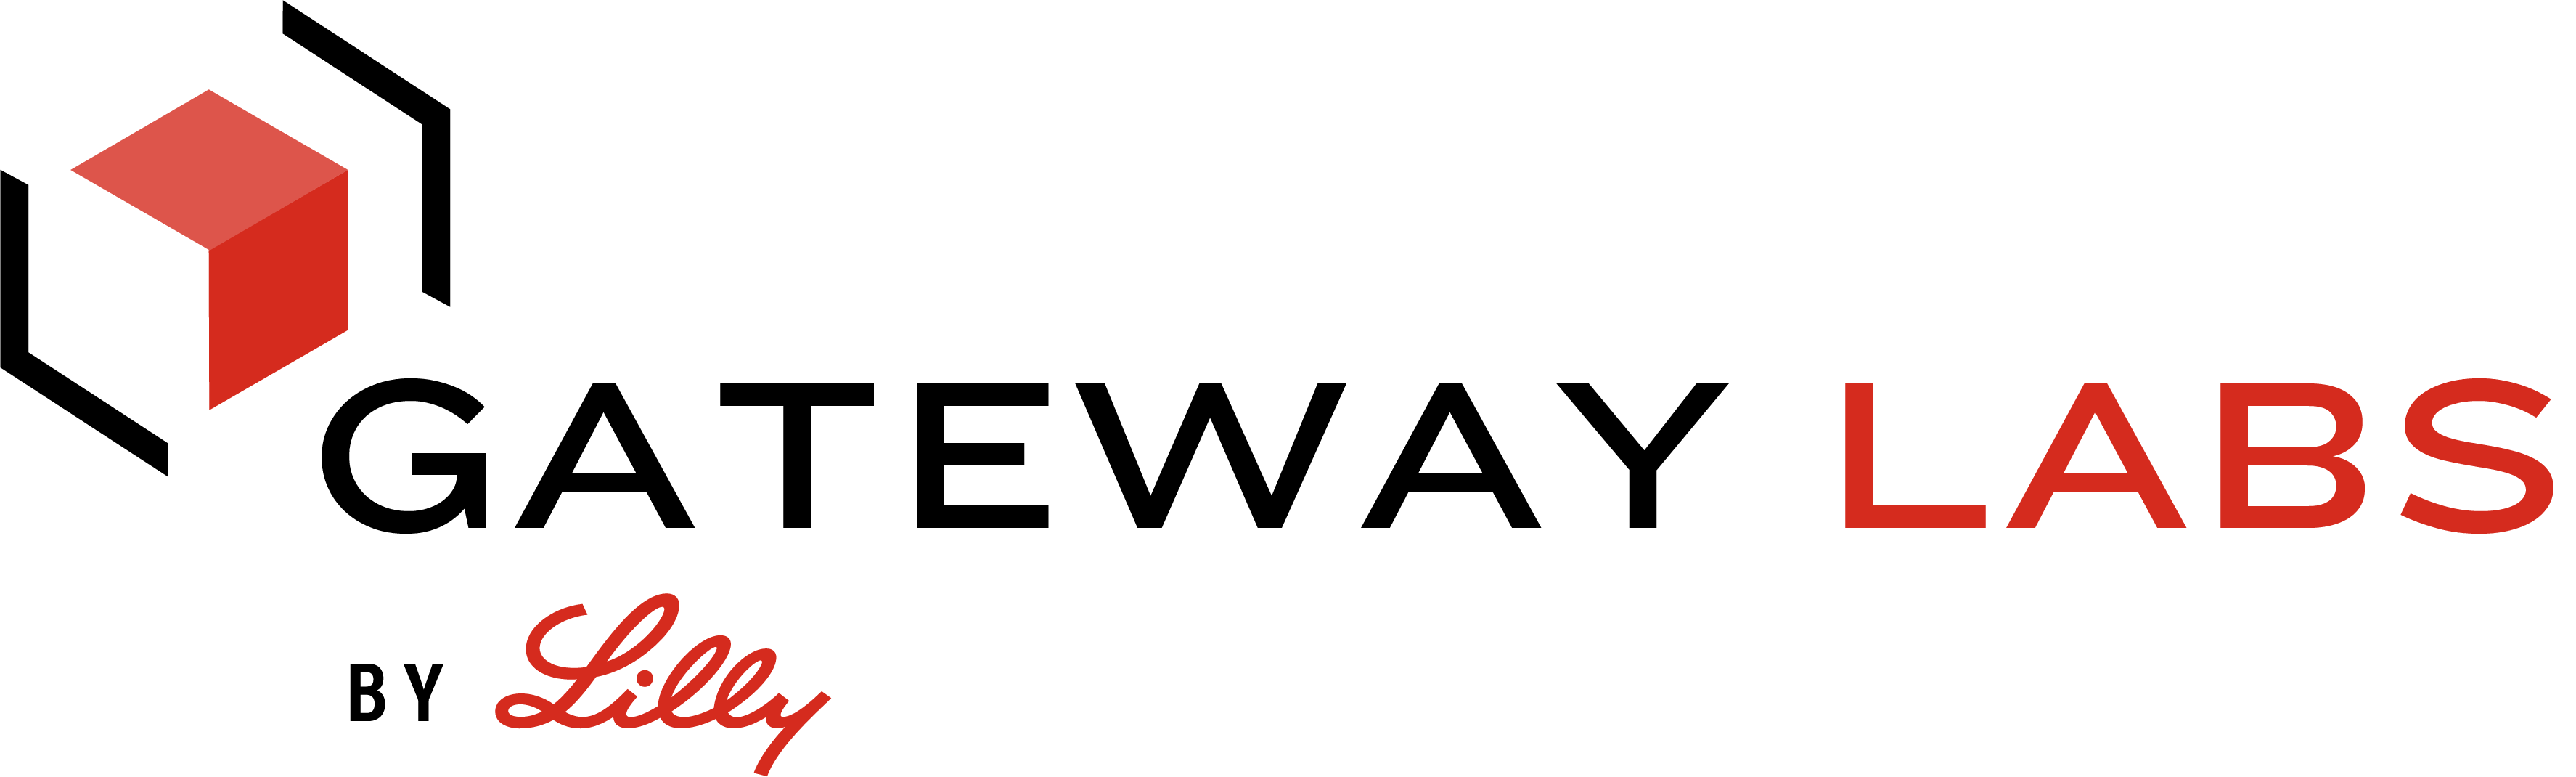 Gateway Labs by Lilly logo